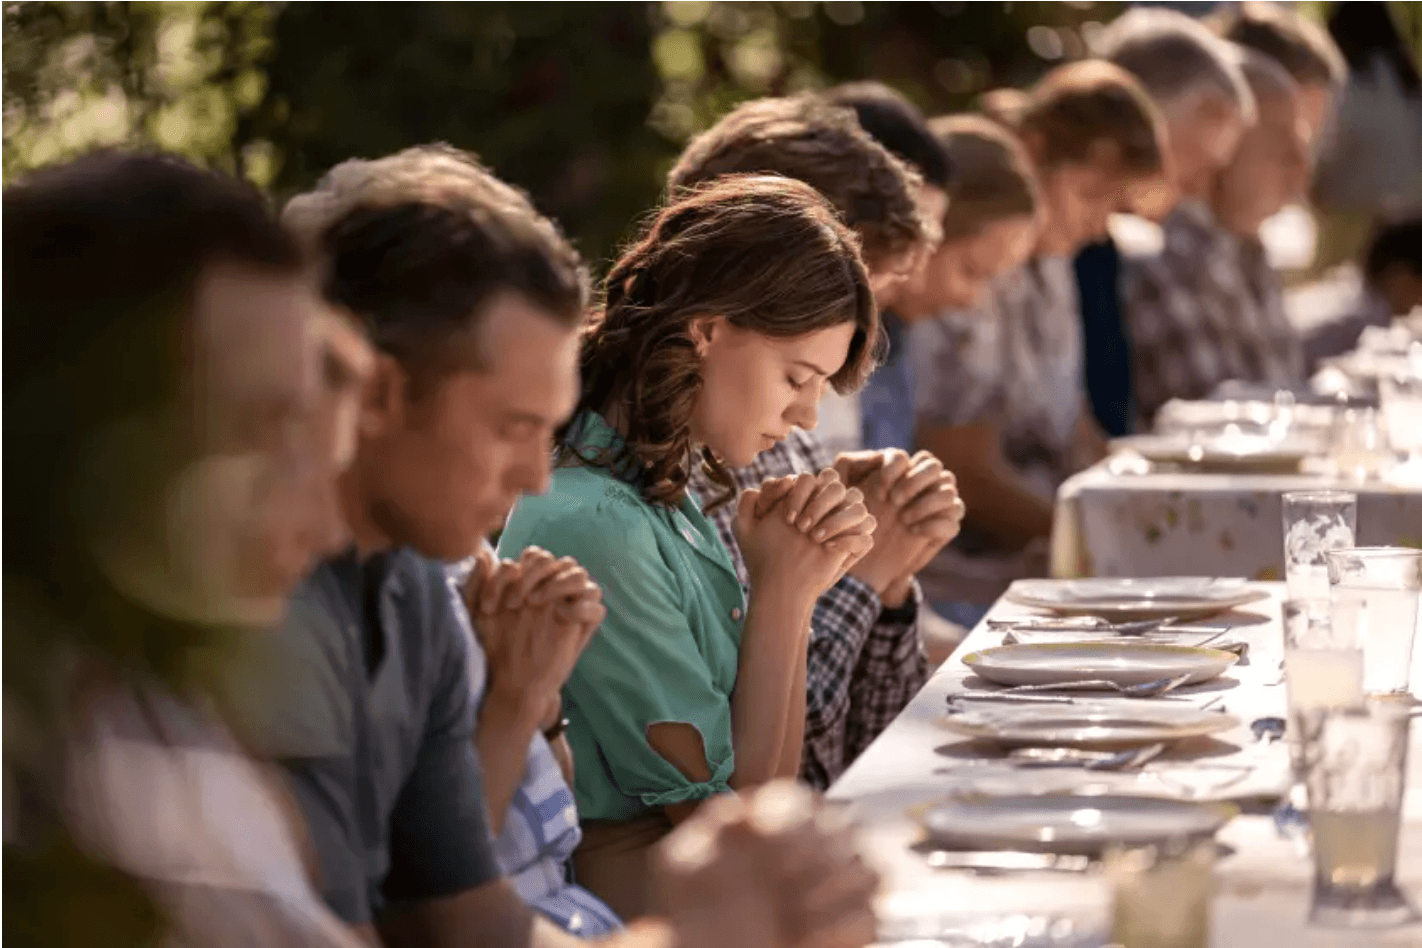 Praying before a meal in “Under the Banner of Heaven.”